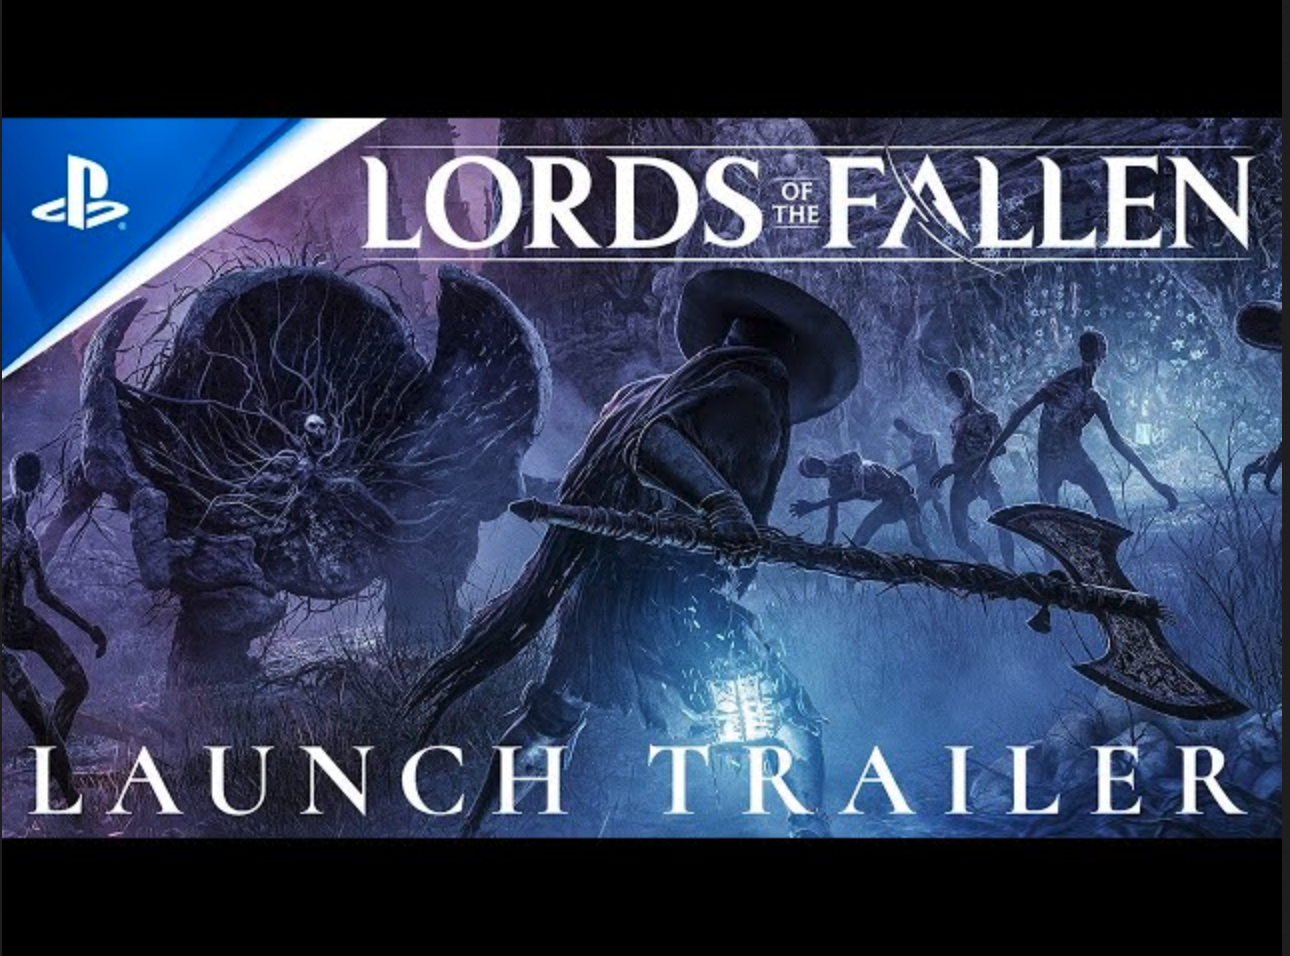 The Lords of the Fallen Gameplay Teaser Trailer